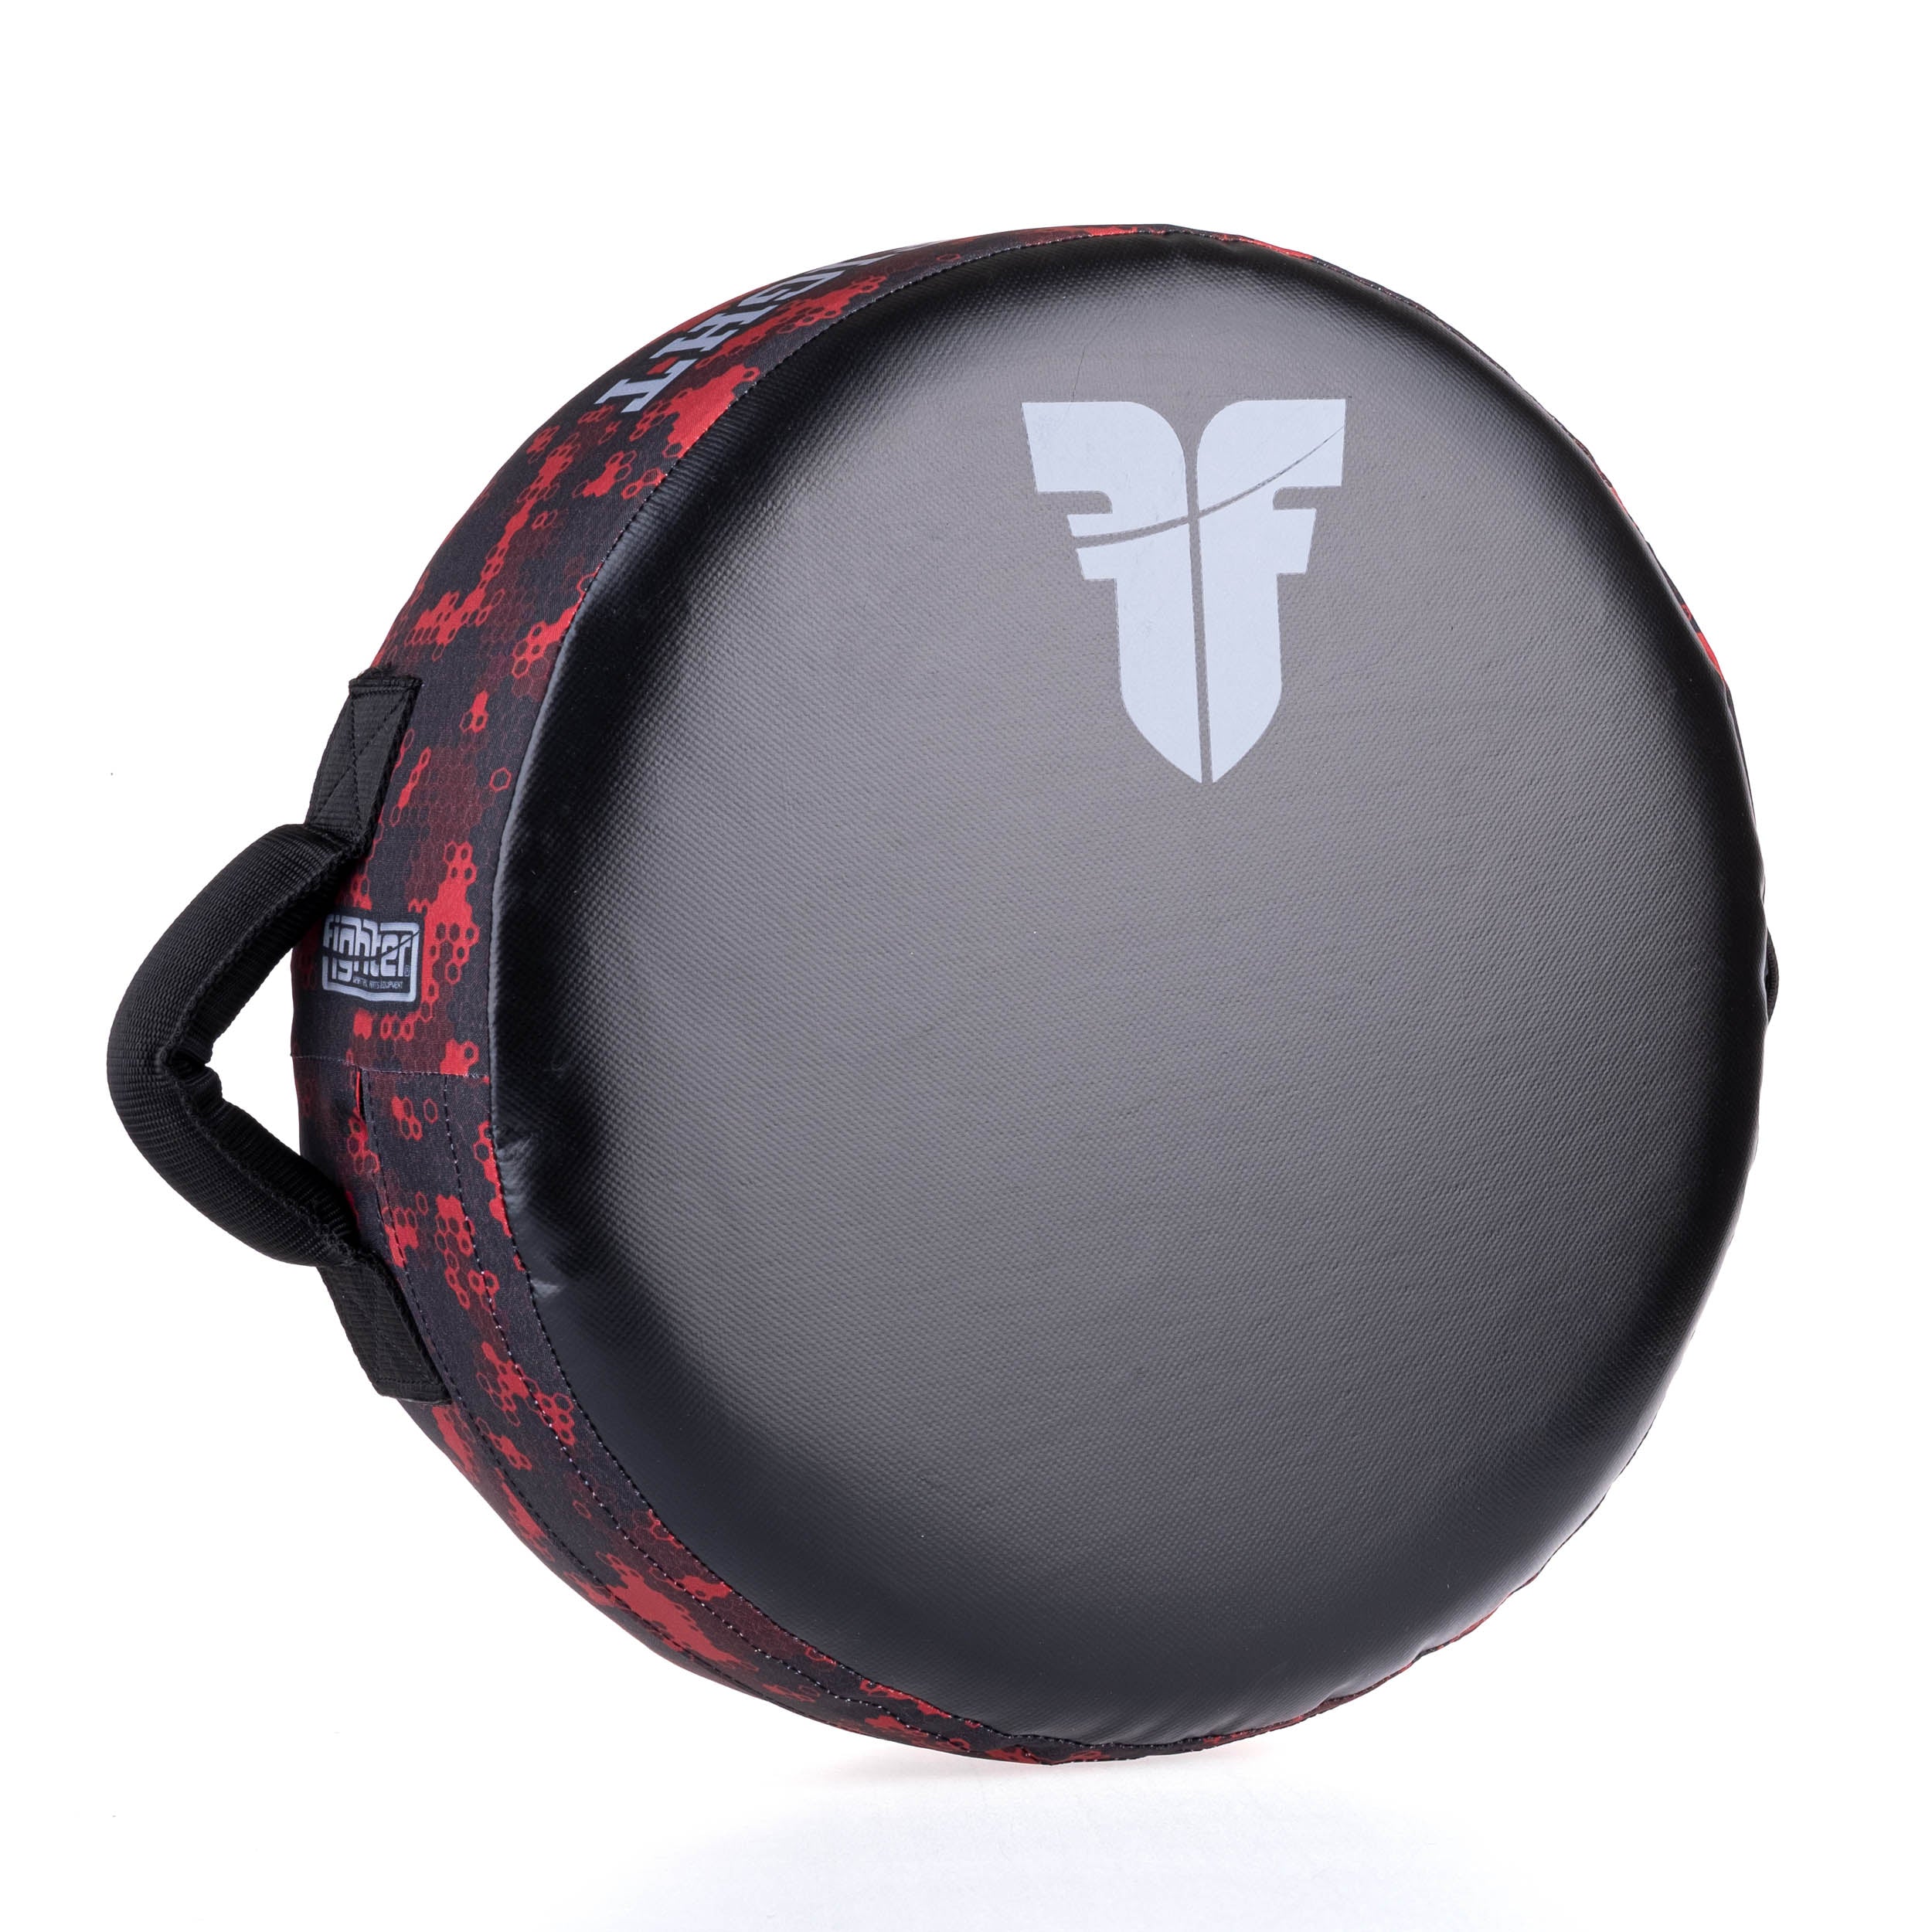 Fighter Round Shield - Life Is A Fight - red camo, FKSH-32